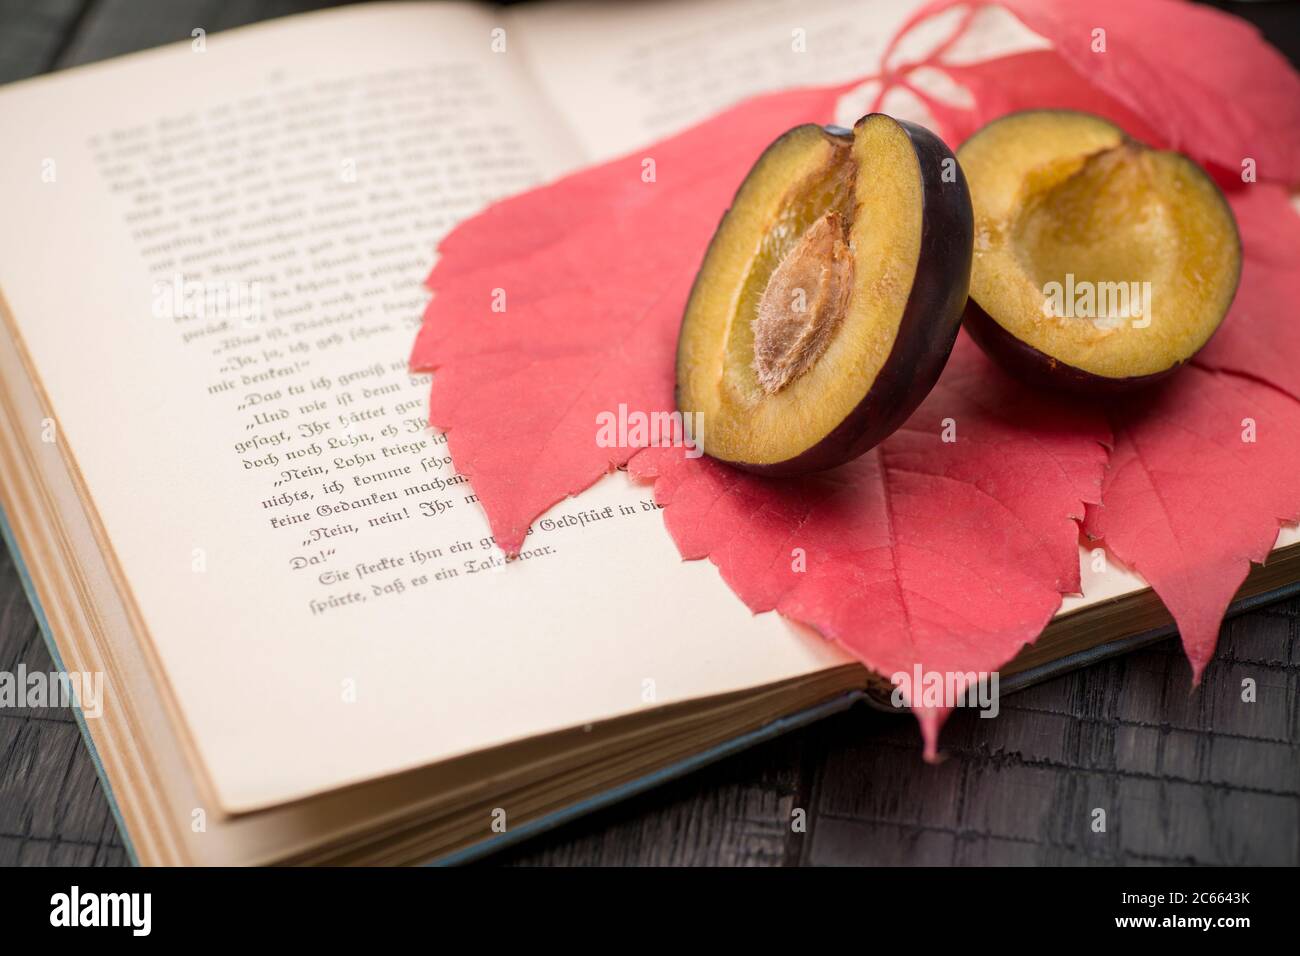 open book, autumn leaf and halved plum Stock Photo